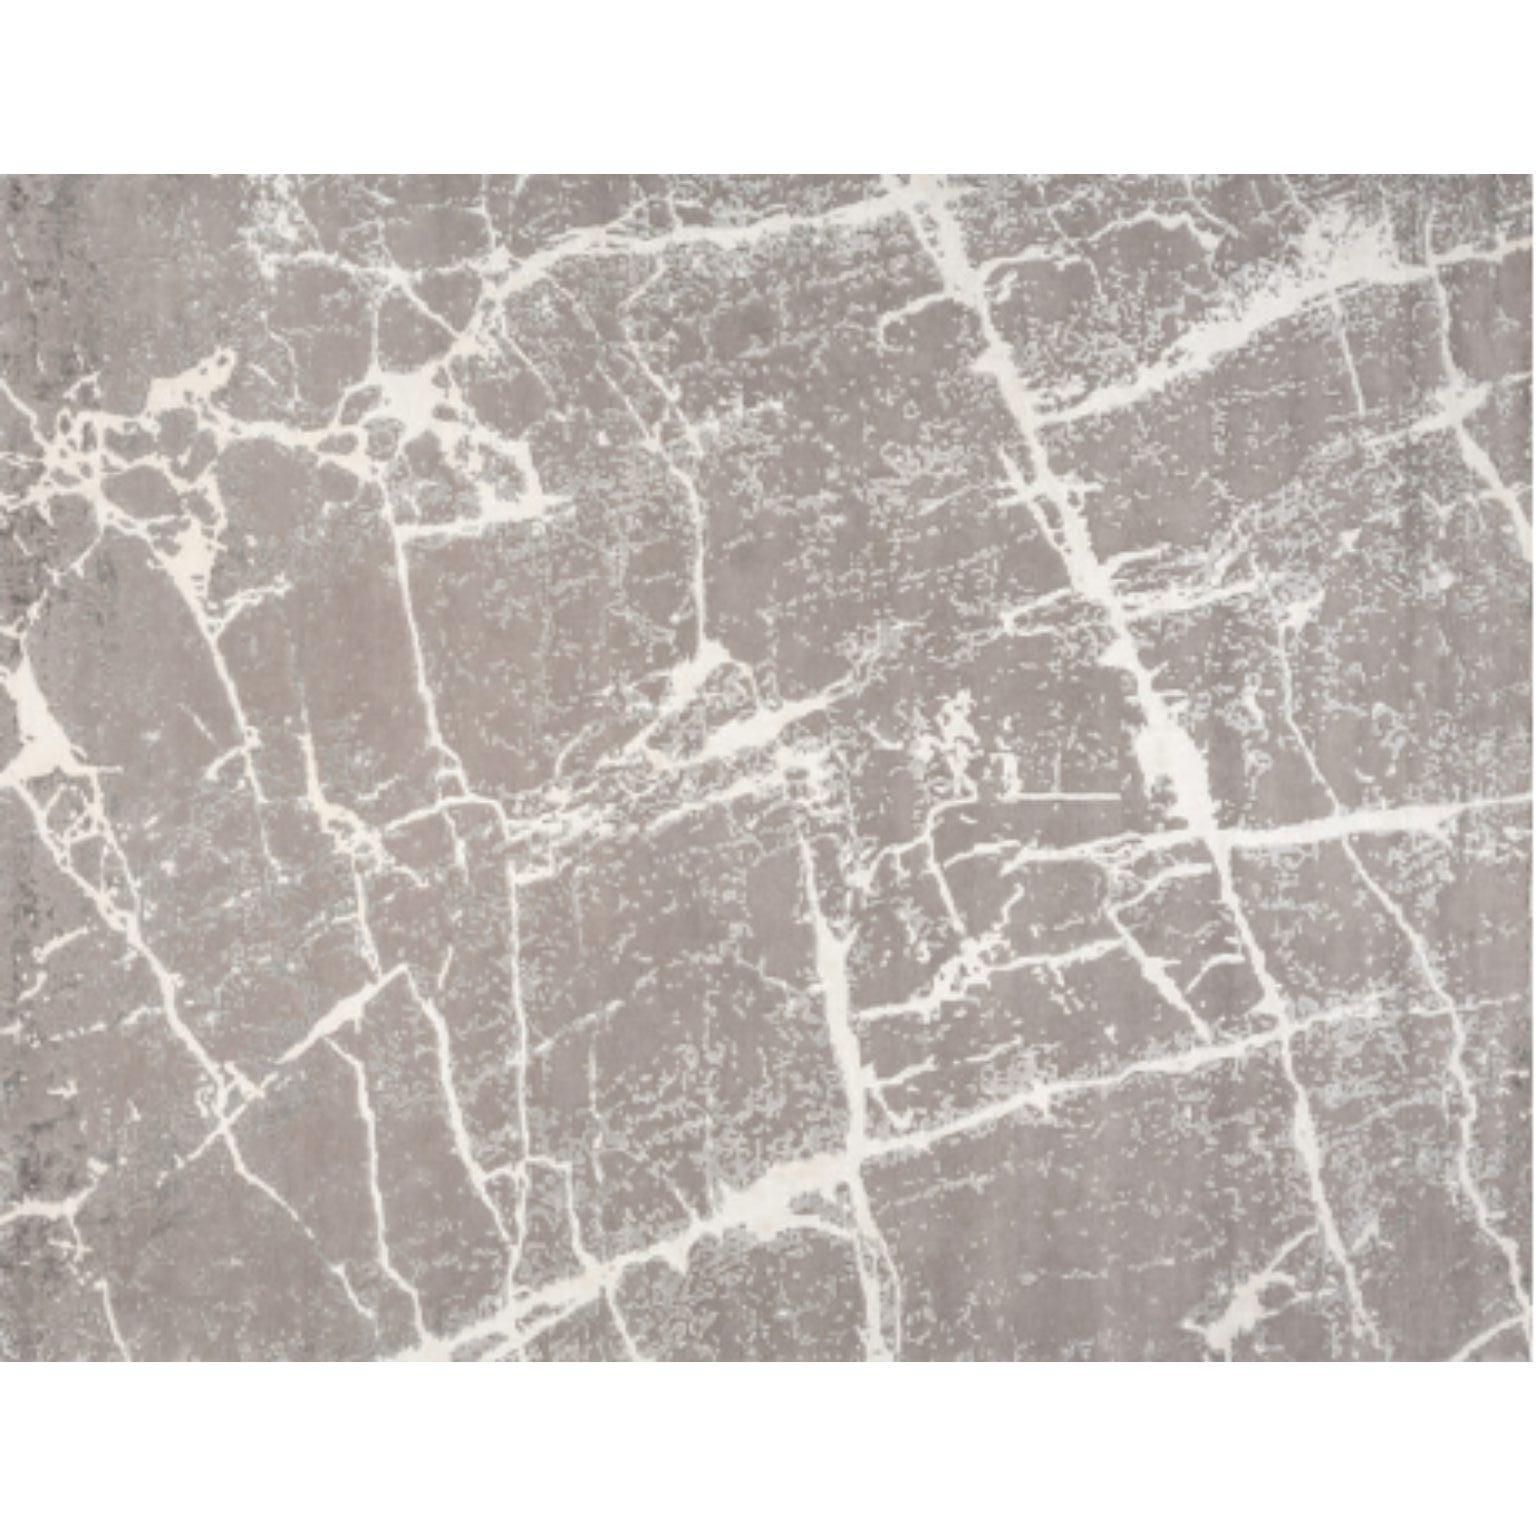 KINTSUGI 400 rug by Illulian
Dimensions: D400 x H300 cm 
Materials: Wool 50%, Silk 50%
Variations available and prices may vary according to materials and sizes. Please contact us.

Illulian, historic and prestigious rug company brand,